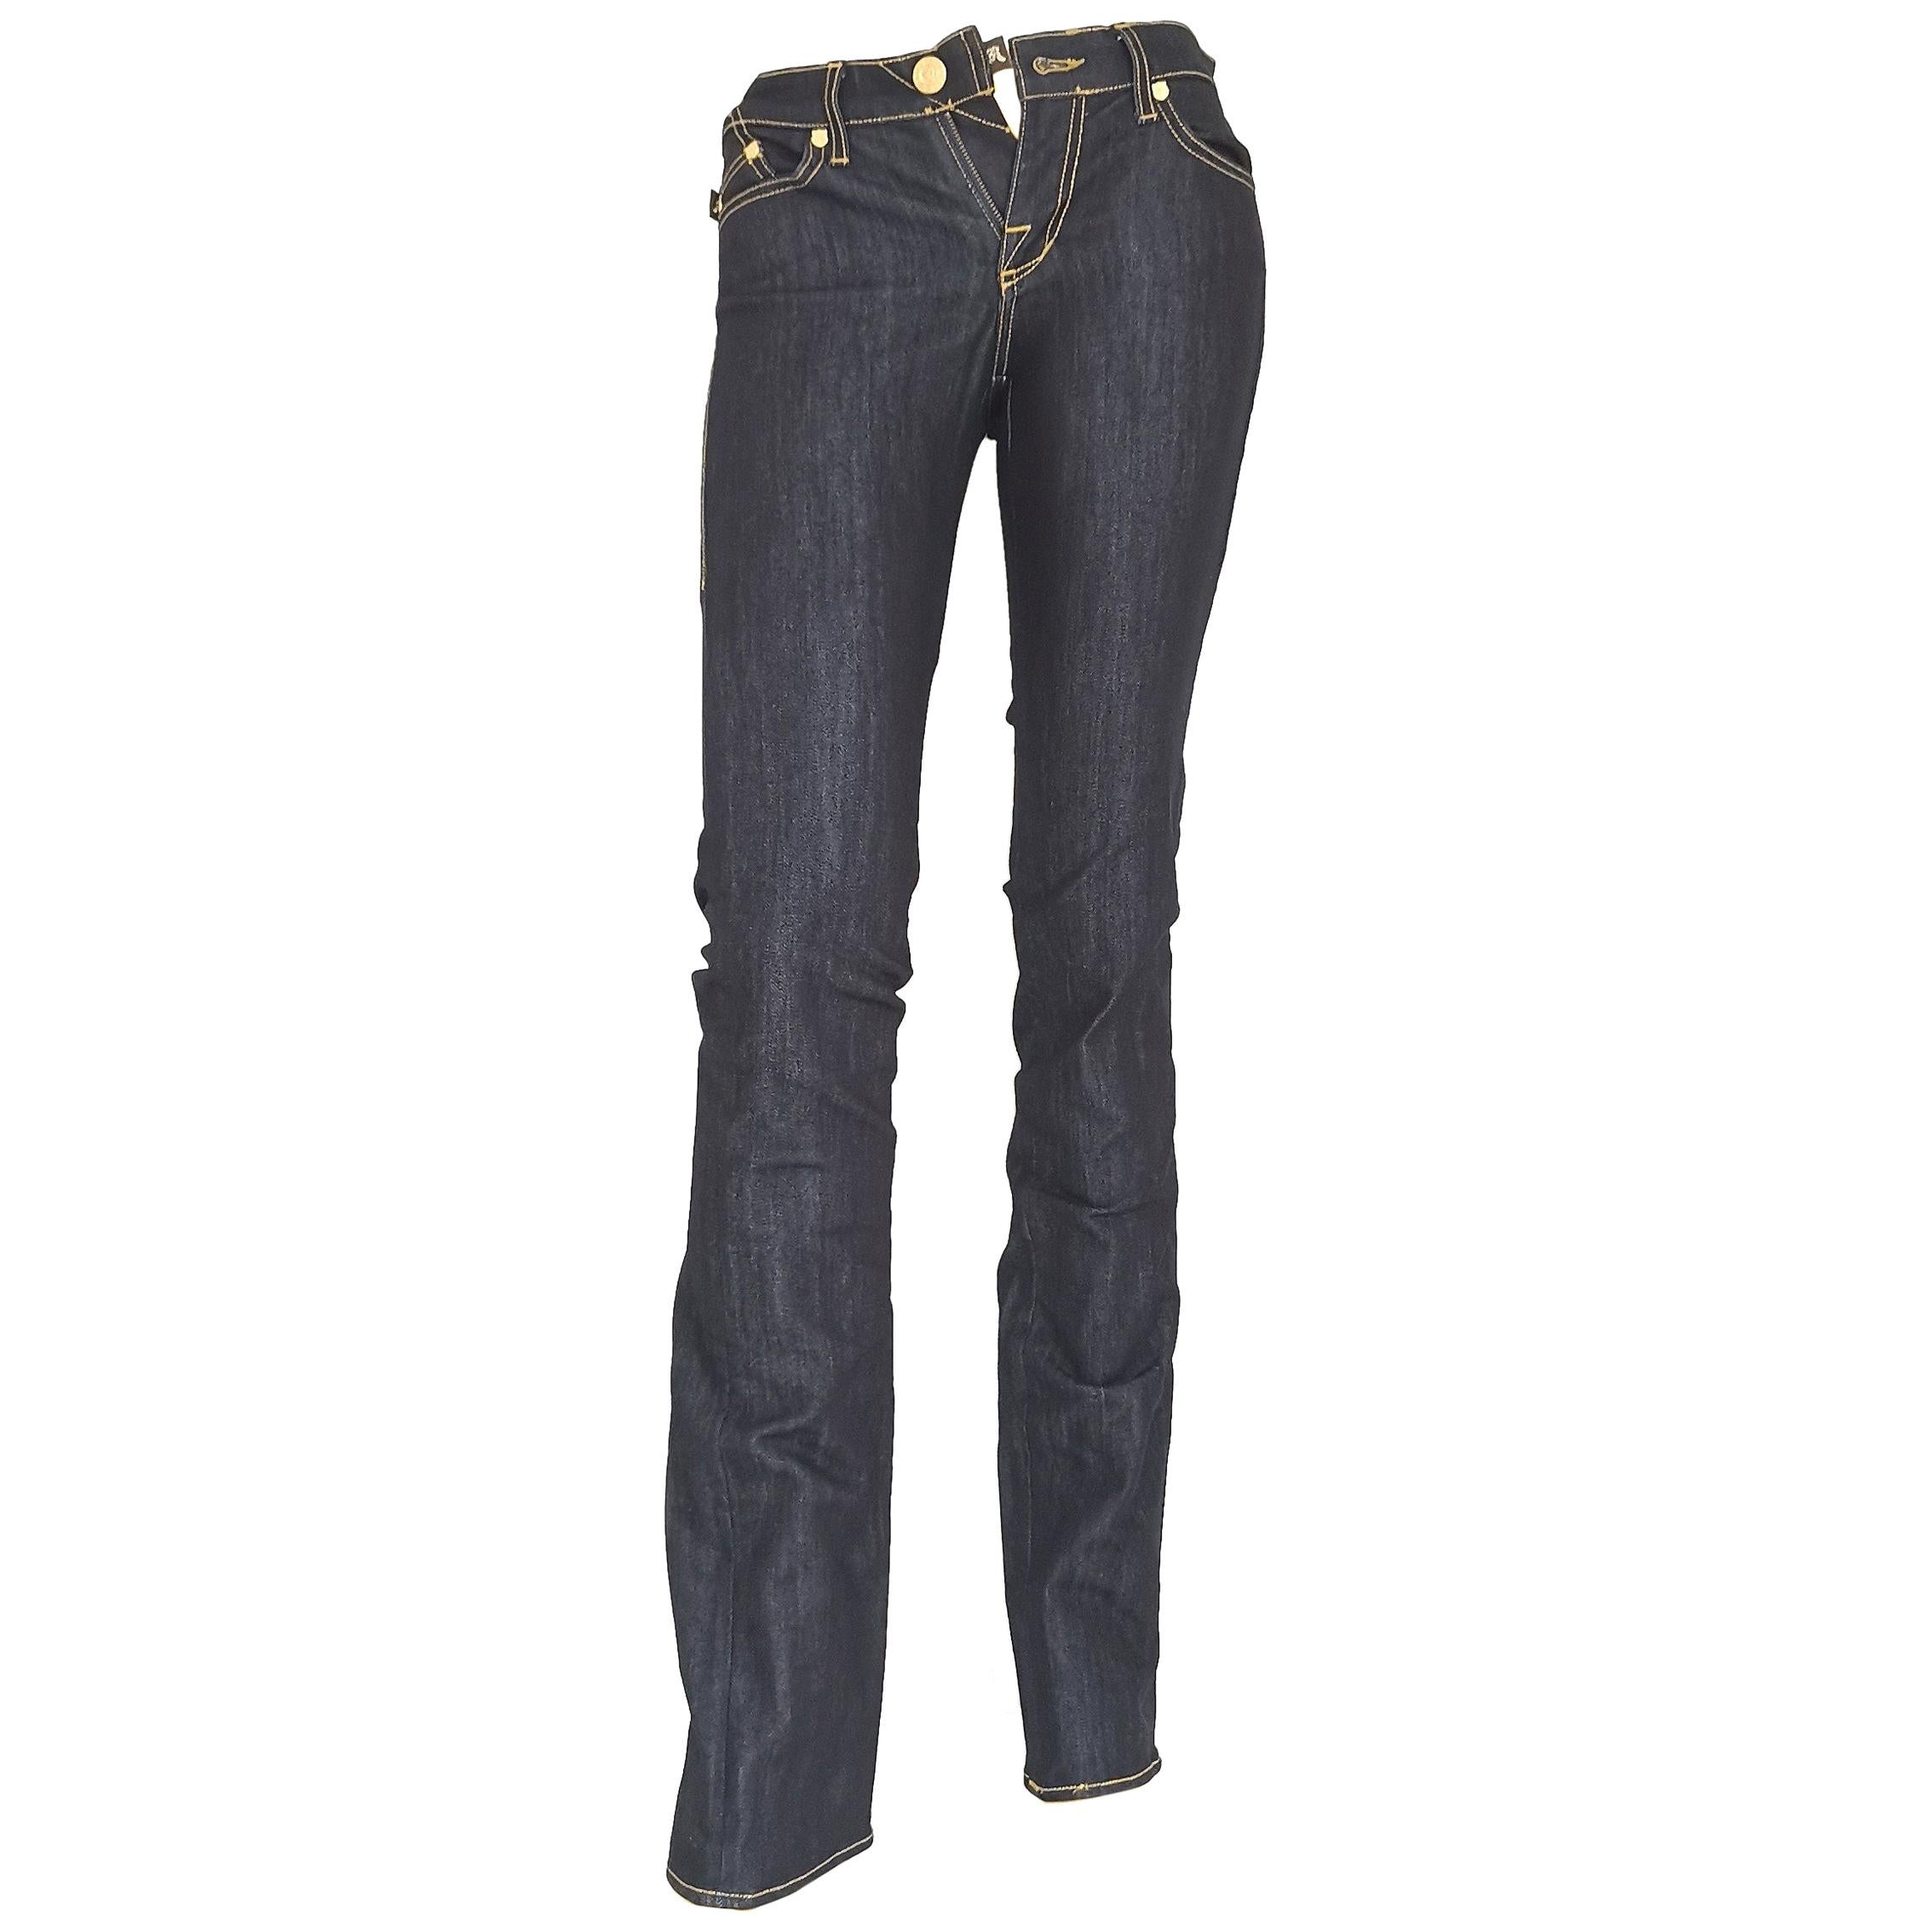 Rock and Republic skinny denim jeans For Sale